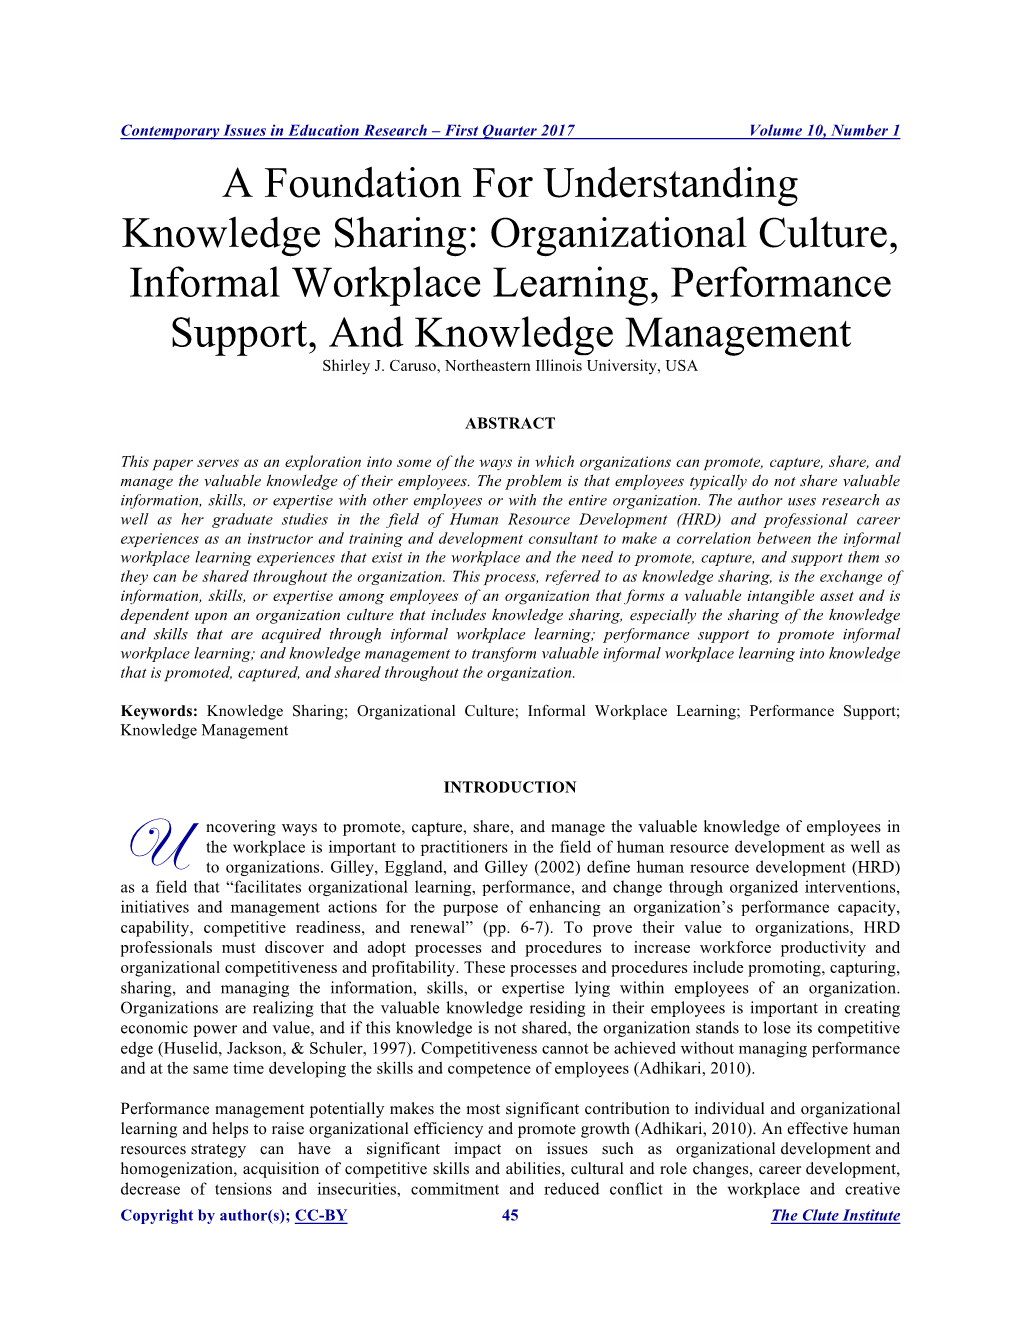 Organizational Culture, Informal Workplace Learning, Performance Support, and Knowledge Management Shirley J